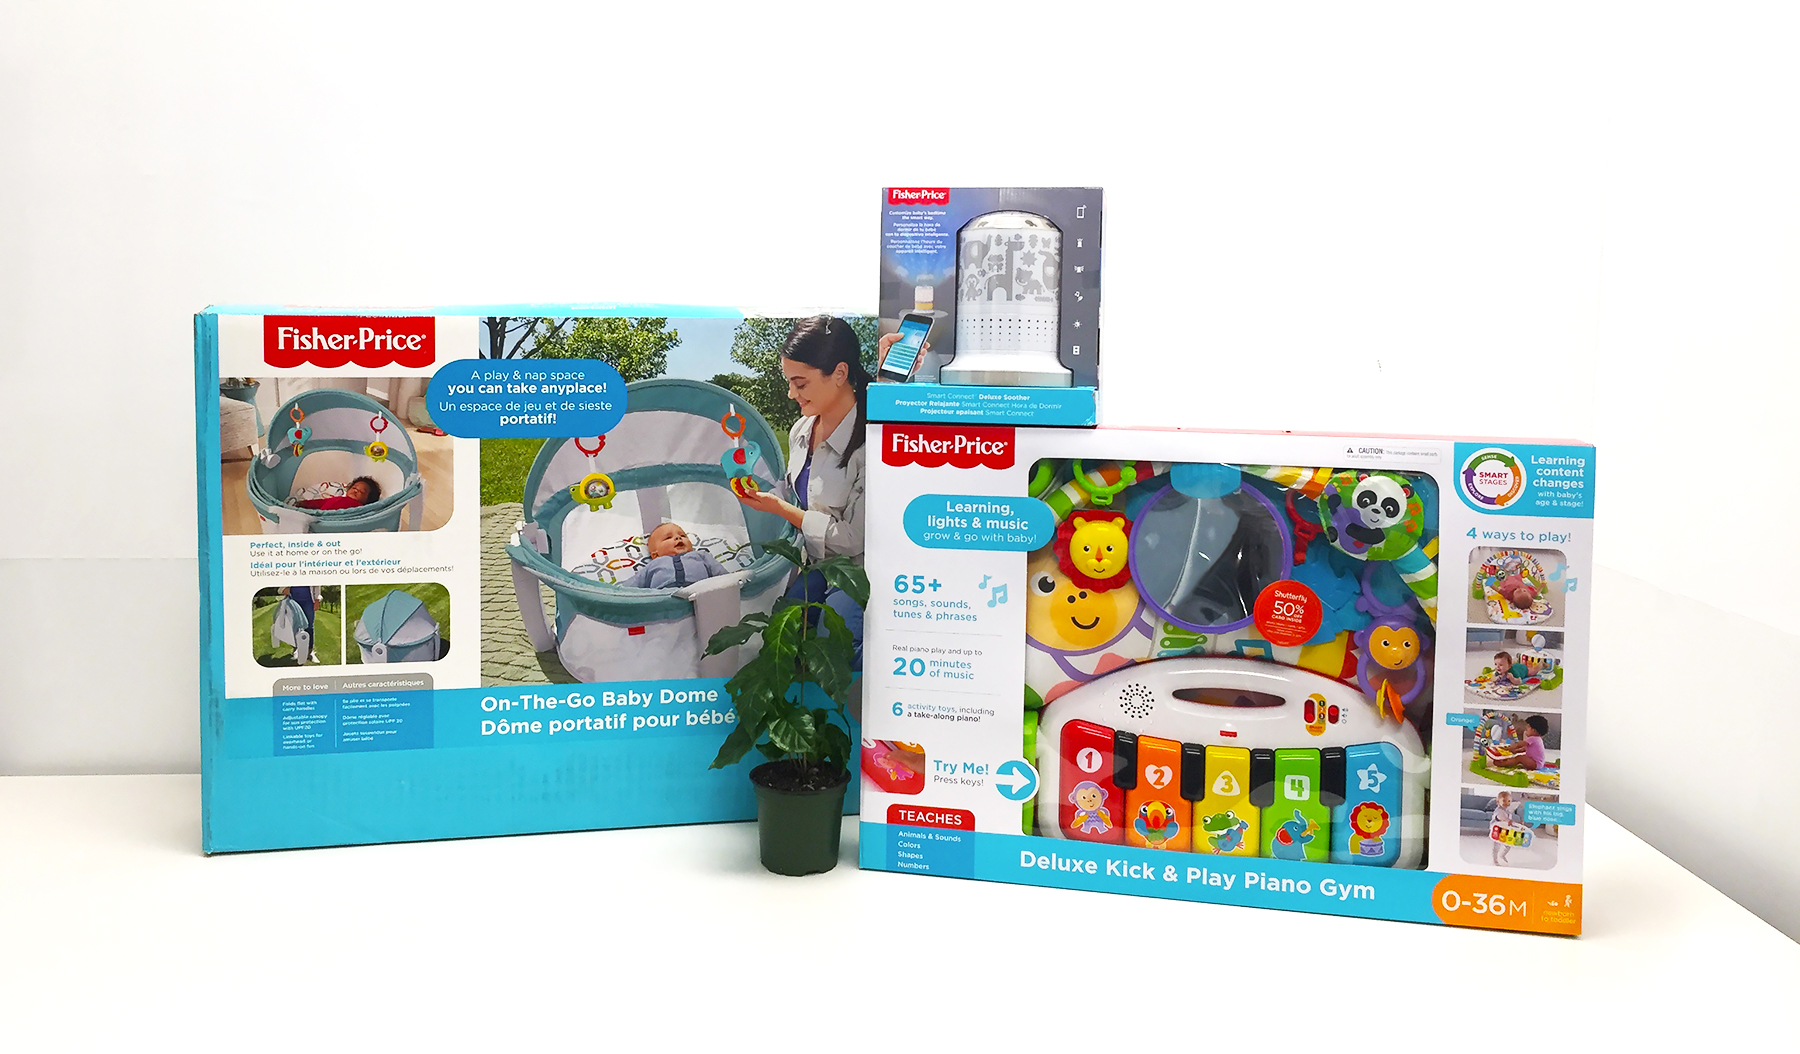 Enter for a chance to win Fisher Price Baby Gear